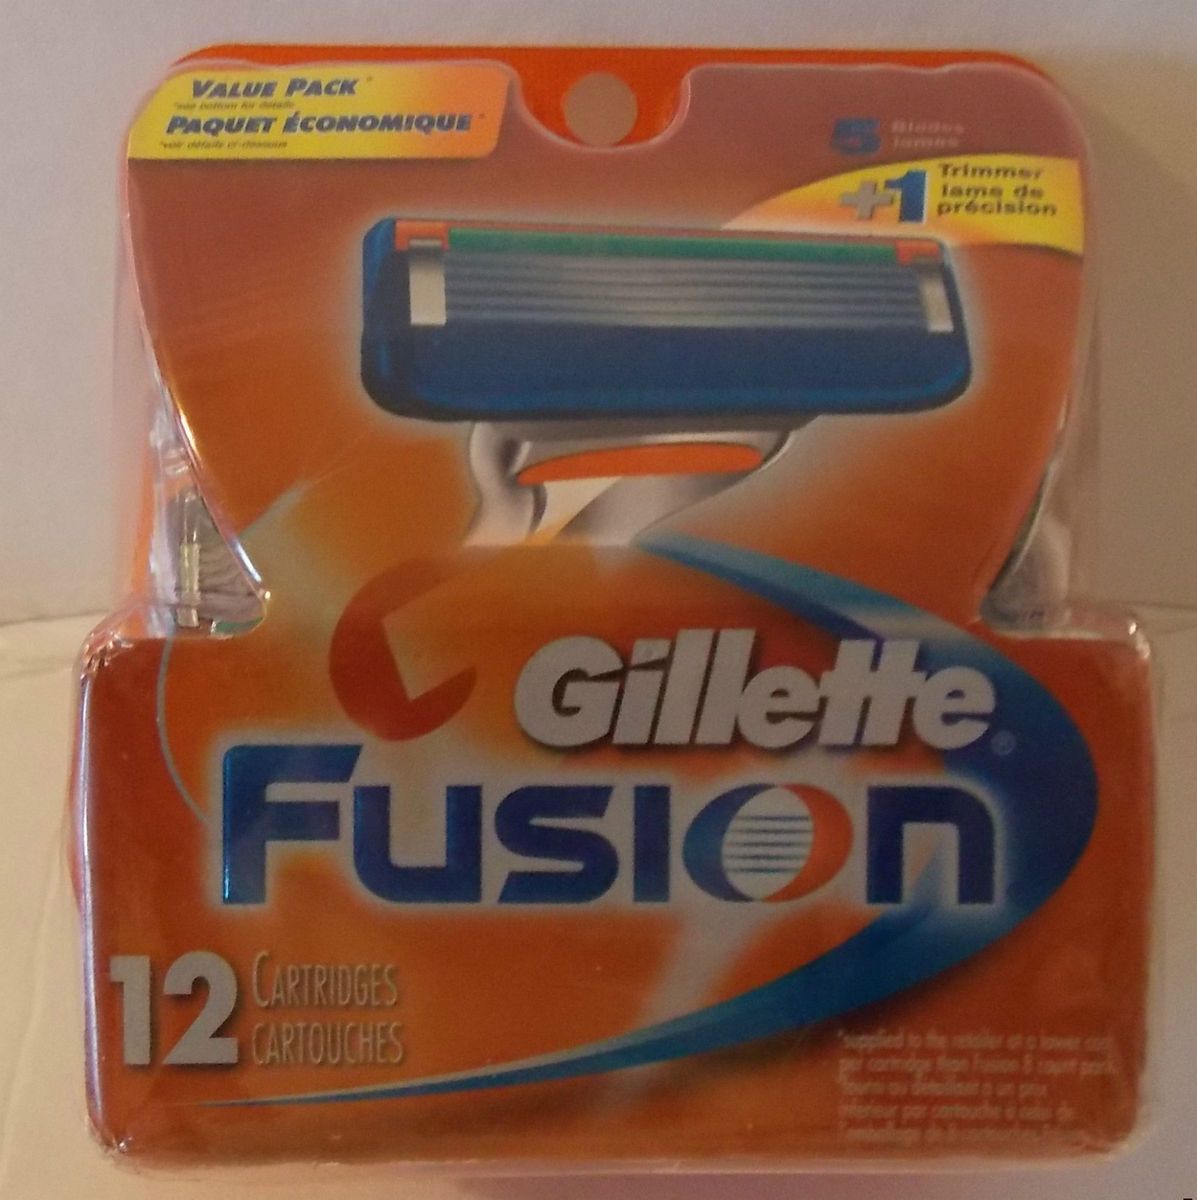 GILLETTE FUSION RAZOR BLADES 2 PACKAGES OF 12 CARTRIDGES BRAND NEW